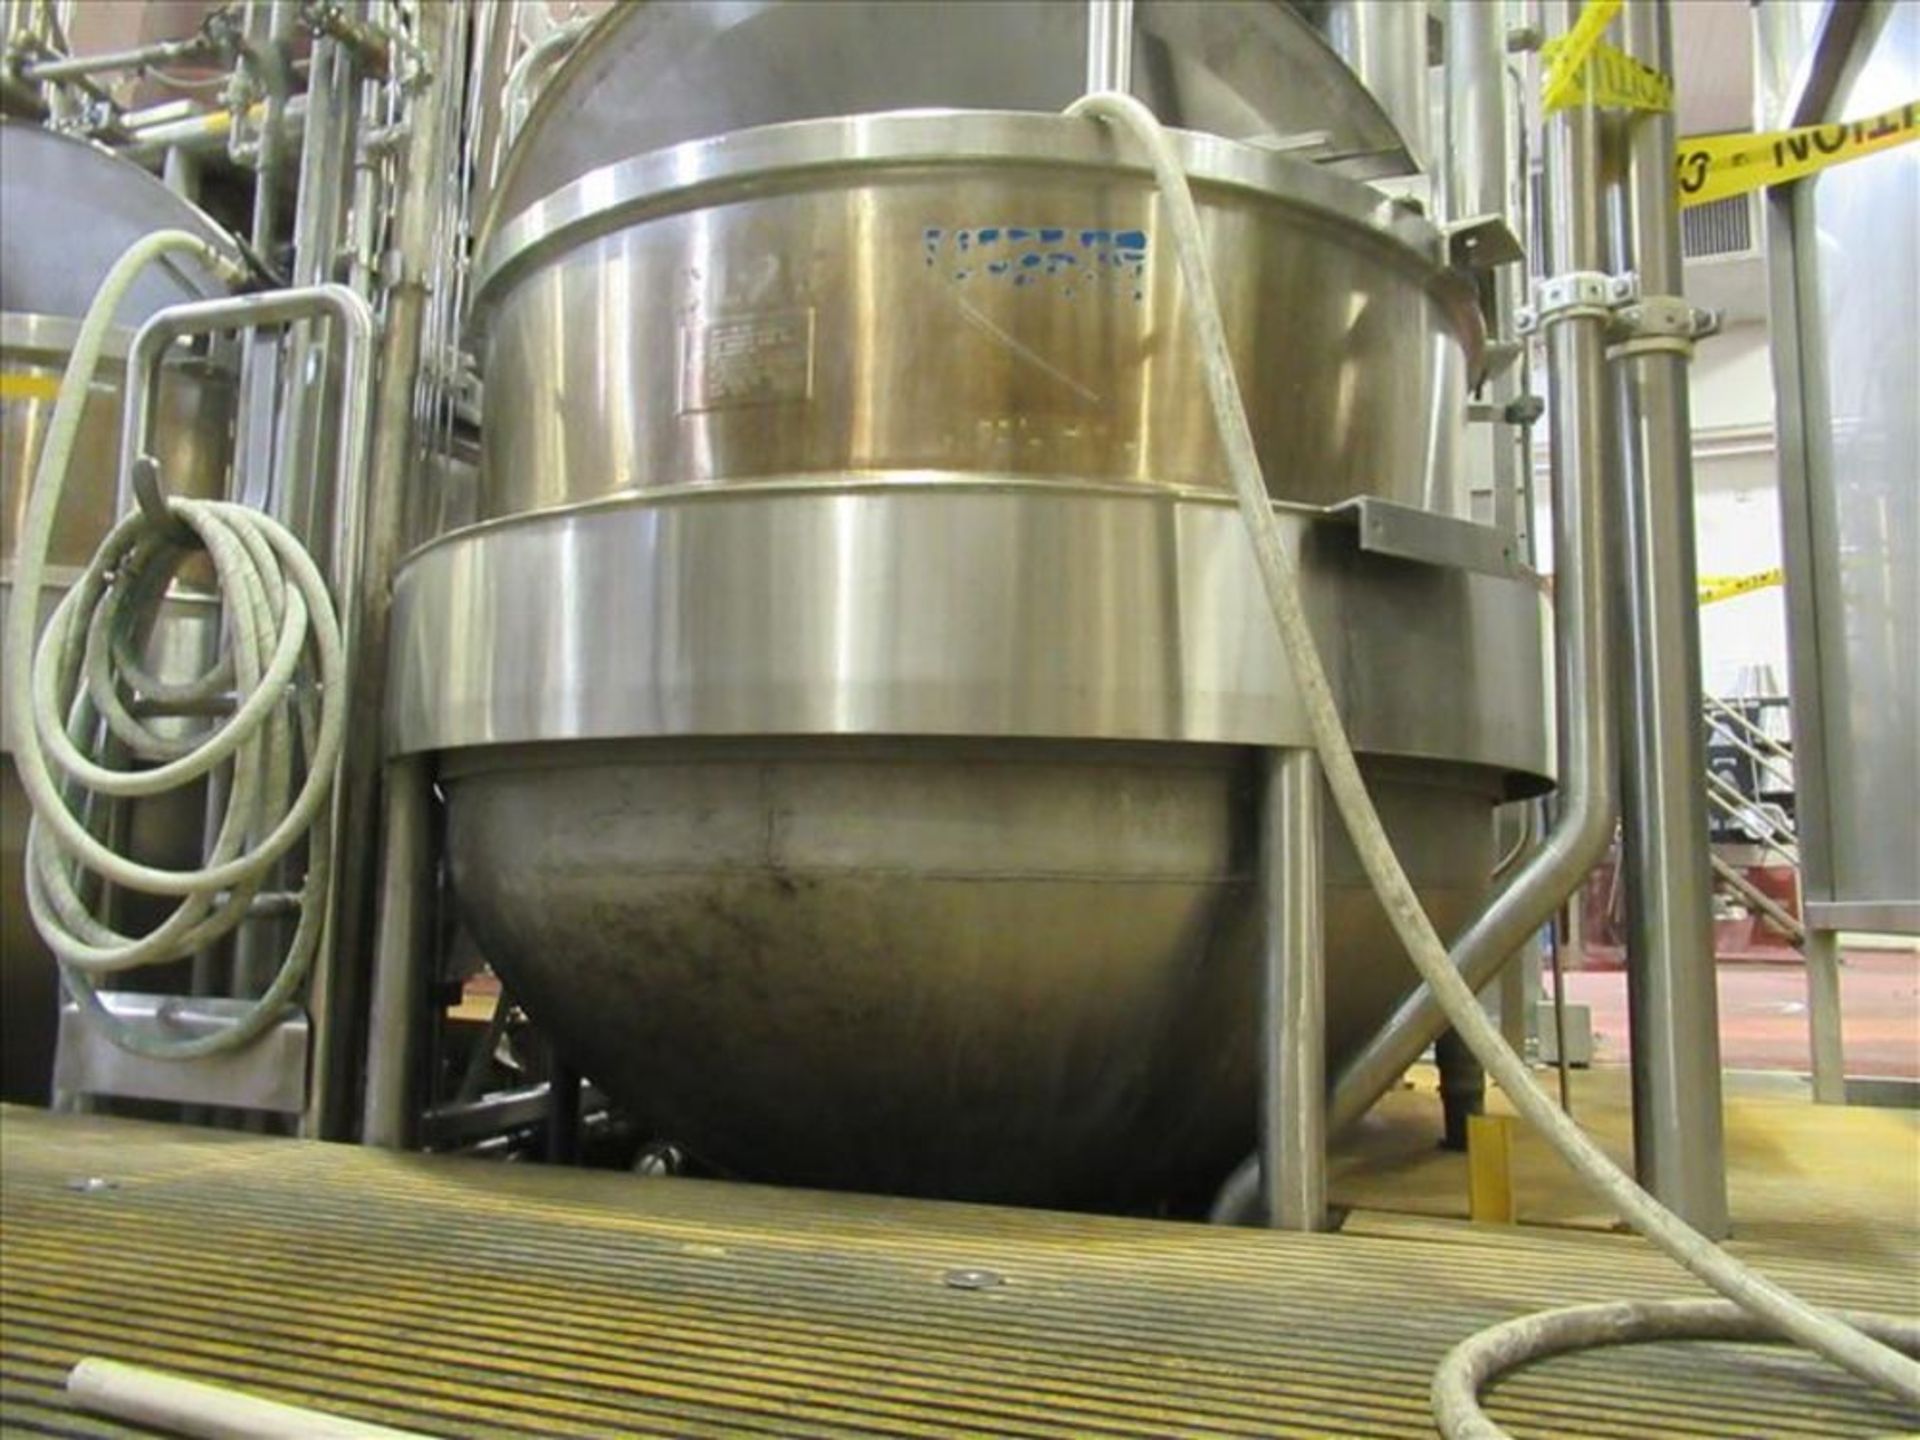 J. C. Pardo jacketed kettle ser. no. 7120-3 approx 300 gallons capacity, stainless jacketed, 50 - Image 3 of 3